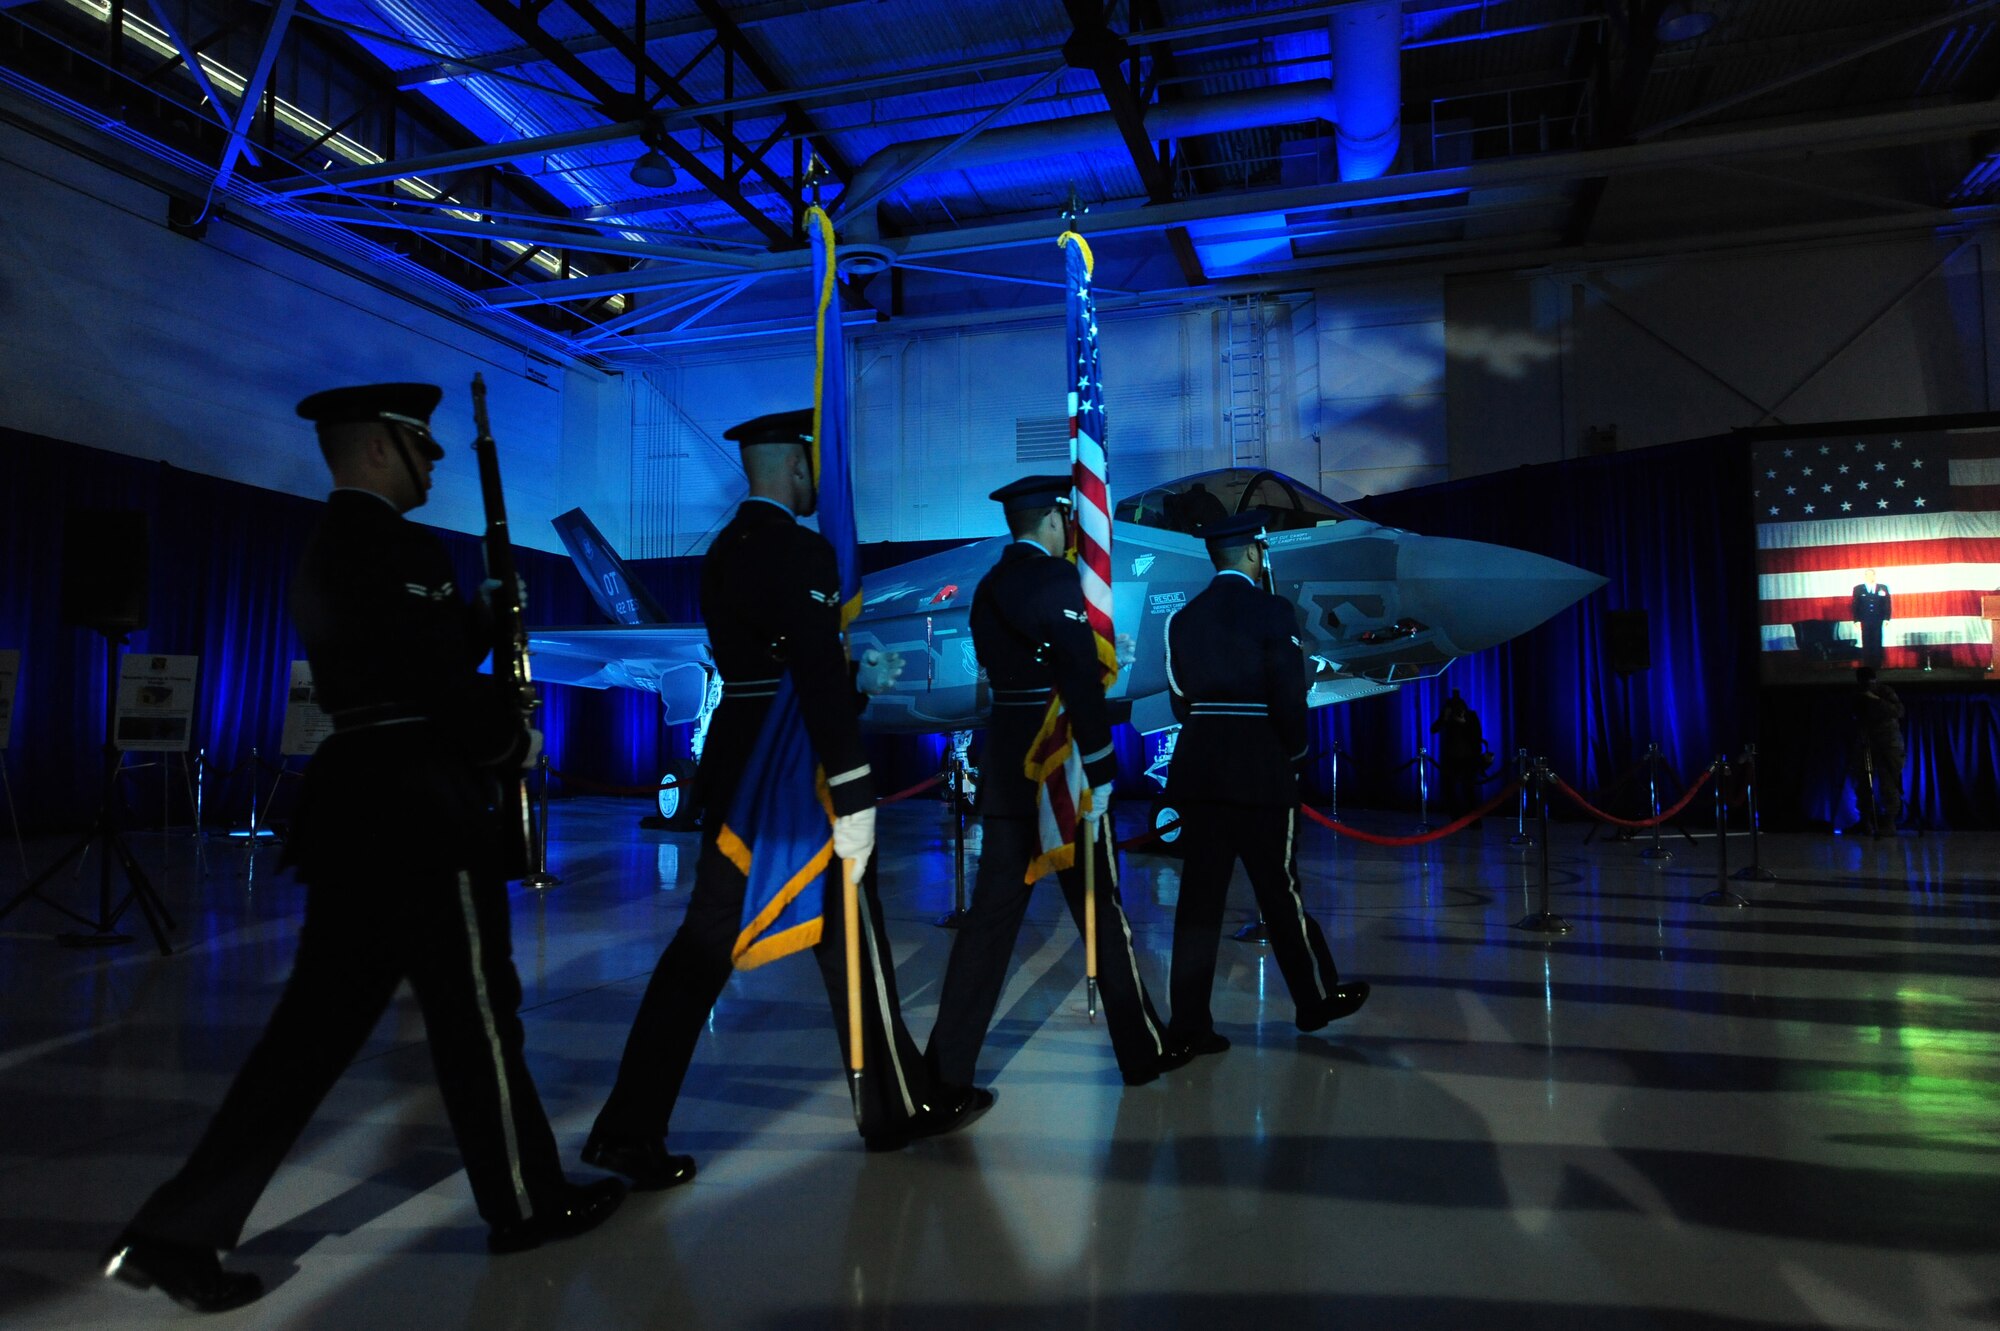 The Nellis Air Force Base Honor Guard marches towards the stage to post the colors at the F-35A Lighting II arrival ceremony March 19, 2013, in the Thunderbird Hangar at Nellis Air Force Base, Nev. The 422nd Test and Evaluation Squadron will design tactics for the F-35 and determine how to integrate it with other aircraft in the Air Force inventory. (U.S. Air Force photo by Staff Sgt. William P. Coleman)